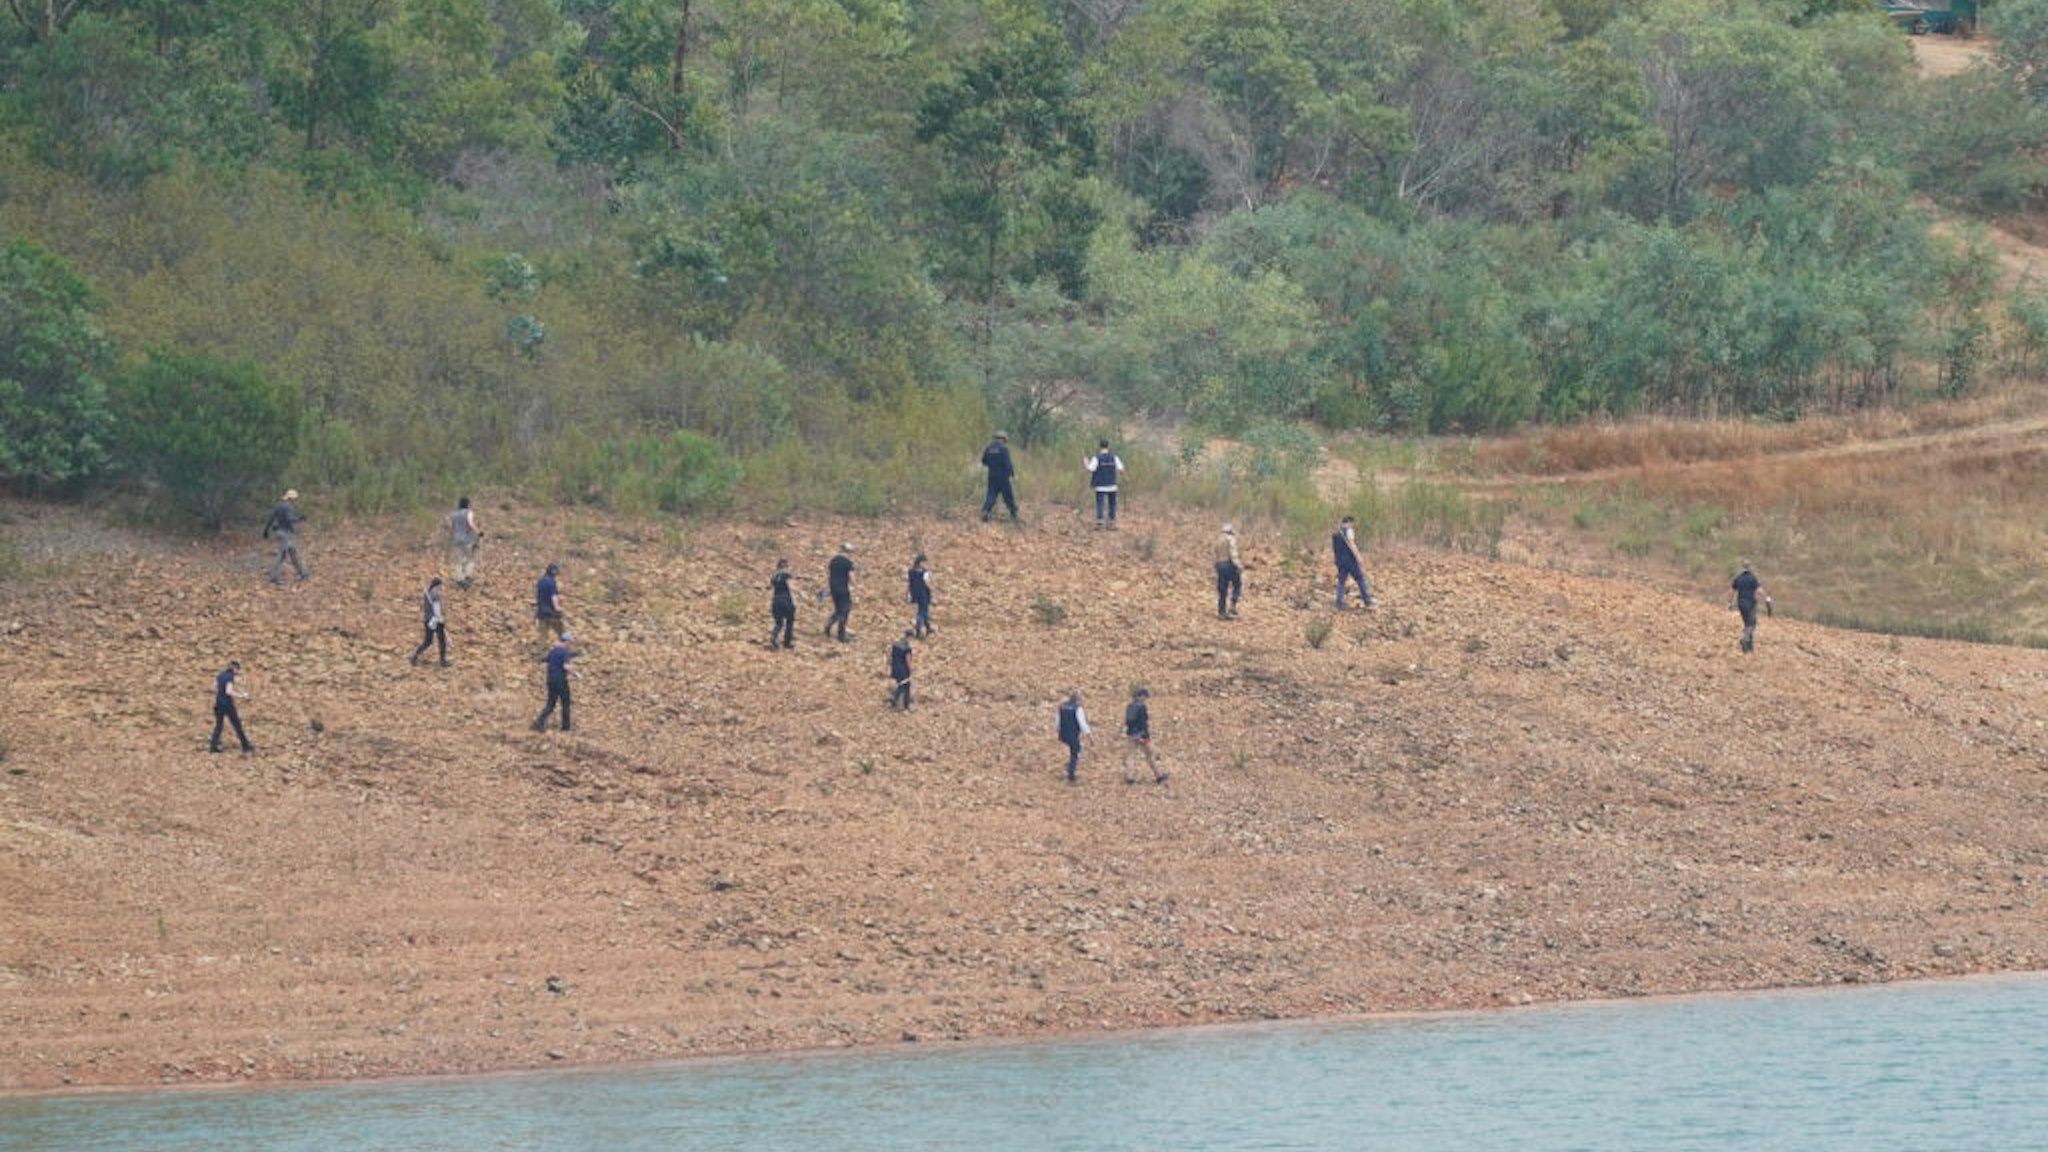 Personnel at Barragem do Arade reservoir, in the Algave, Portugal, as searches begin as part of the investigation into the disappearance of Madeleine McCann.